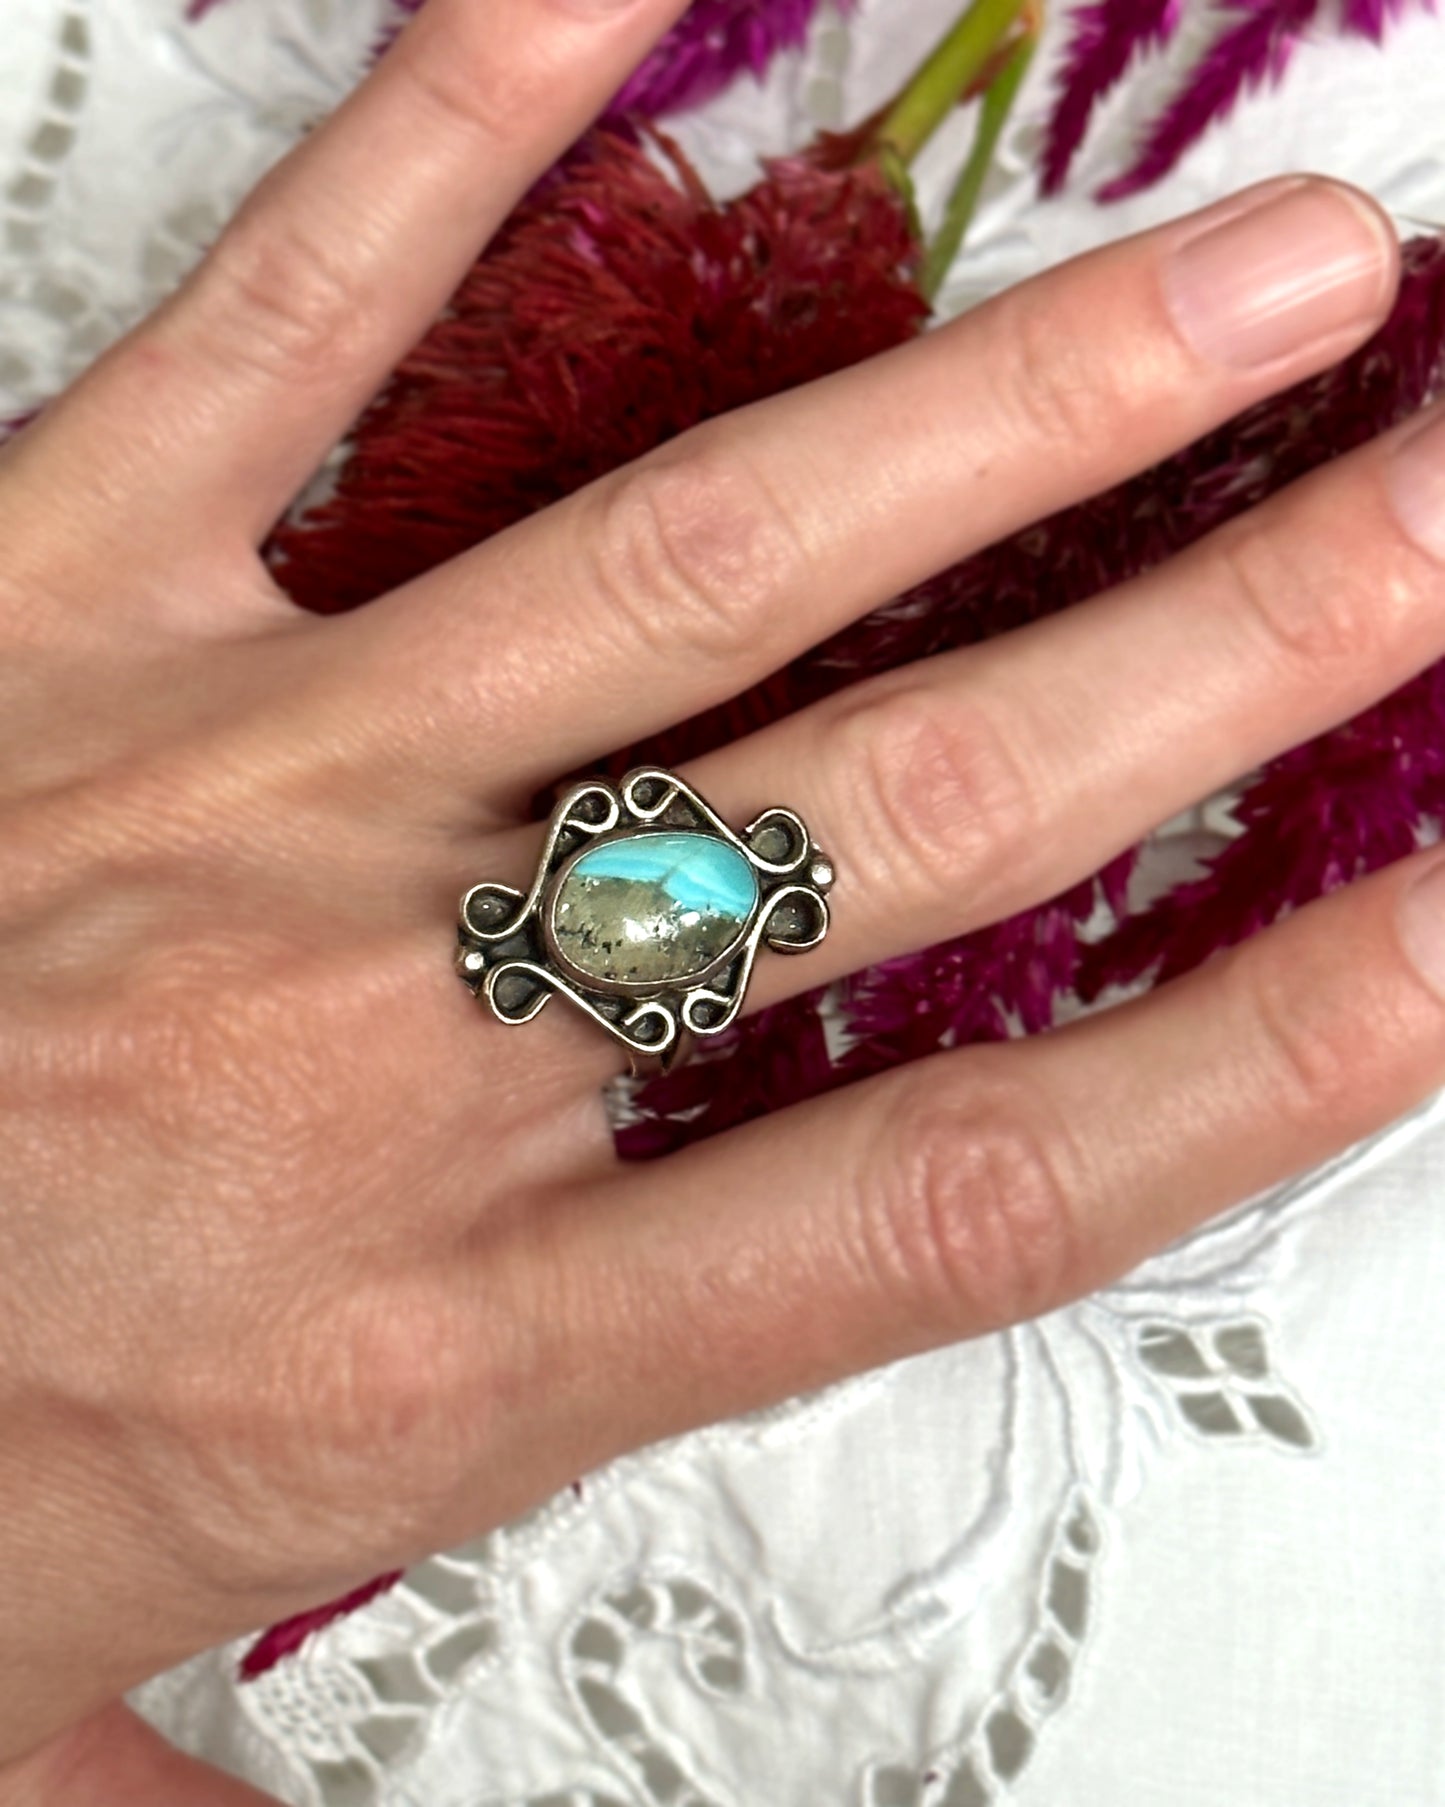 VINTAGE ARTISANAL TURQUOISE RING IN STERLING SILVER